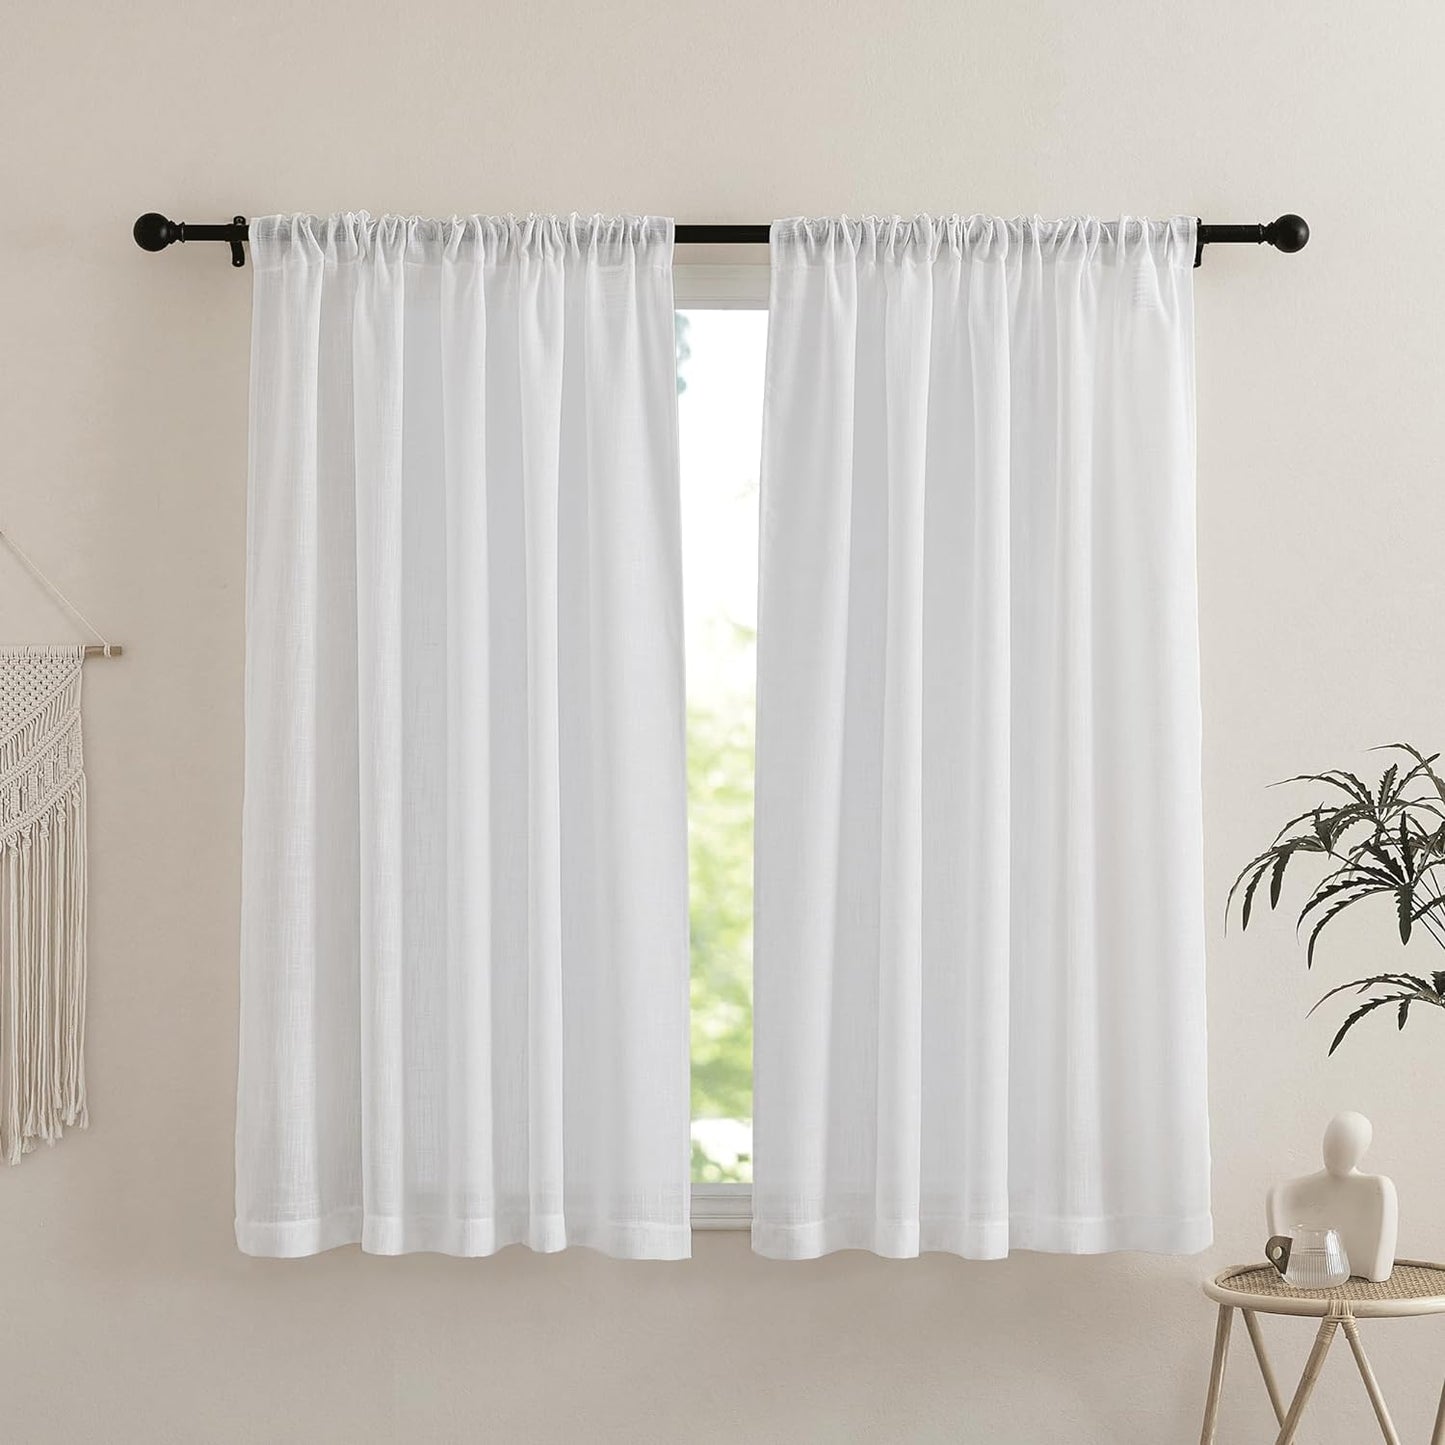 NICETOWN White Curtains Sheer - Semi Sheer Window Covering, Light & Airy Privacy Rod Pocket Back Tab Pinche Pleated Drapes for Bedroom Living Room Patio Glass Door, 52 X 63 Inches Long, Set of 2  NICETOWN   